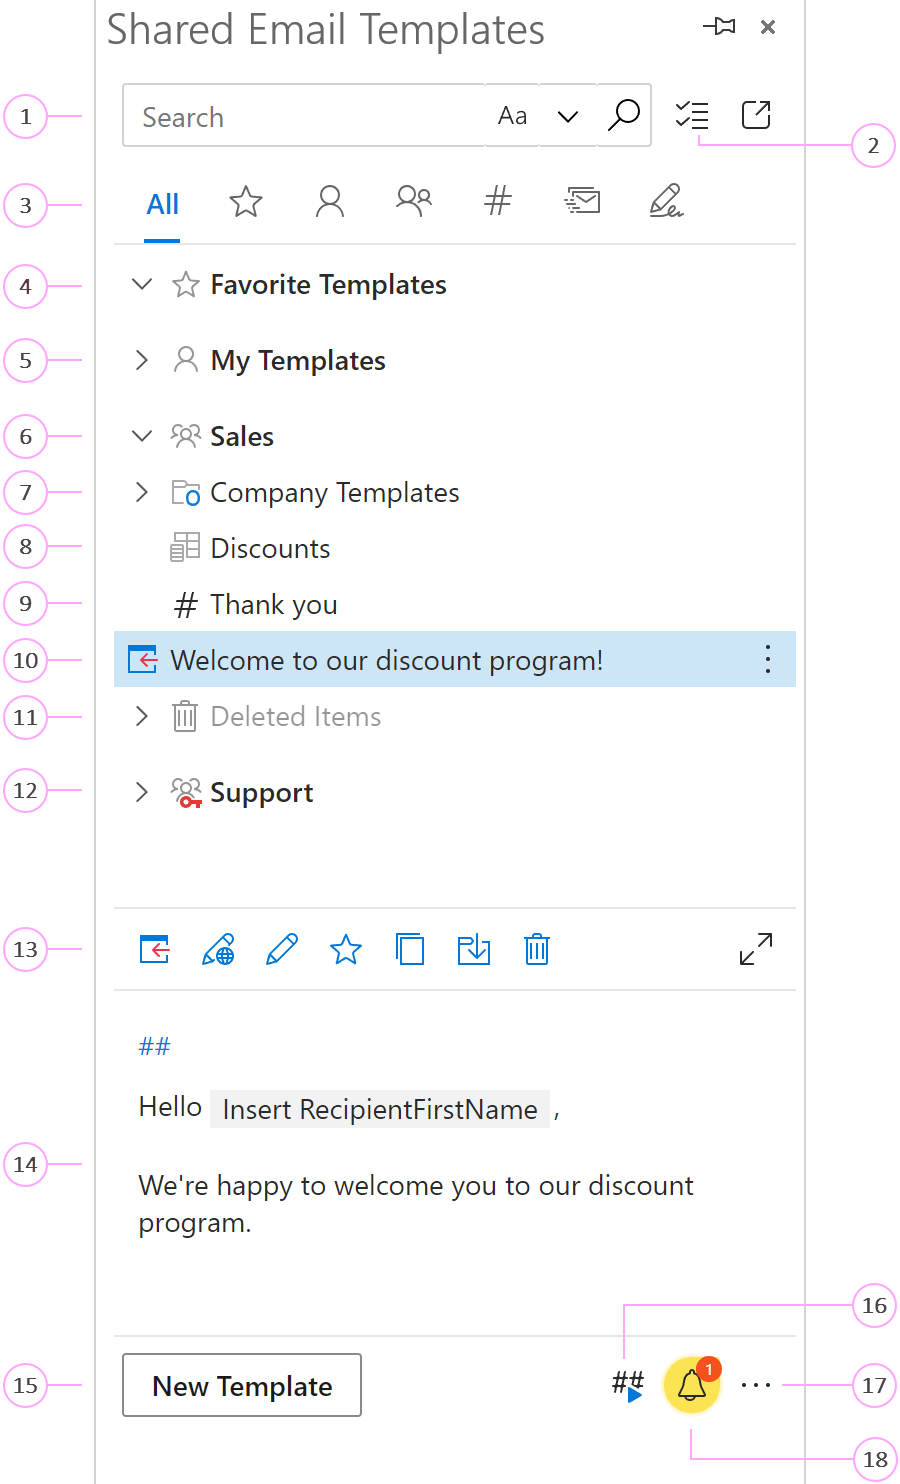 Shared Email Templates in your Outlook